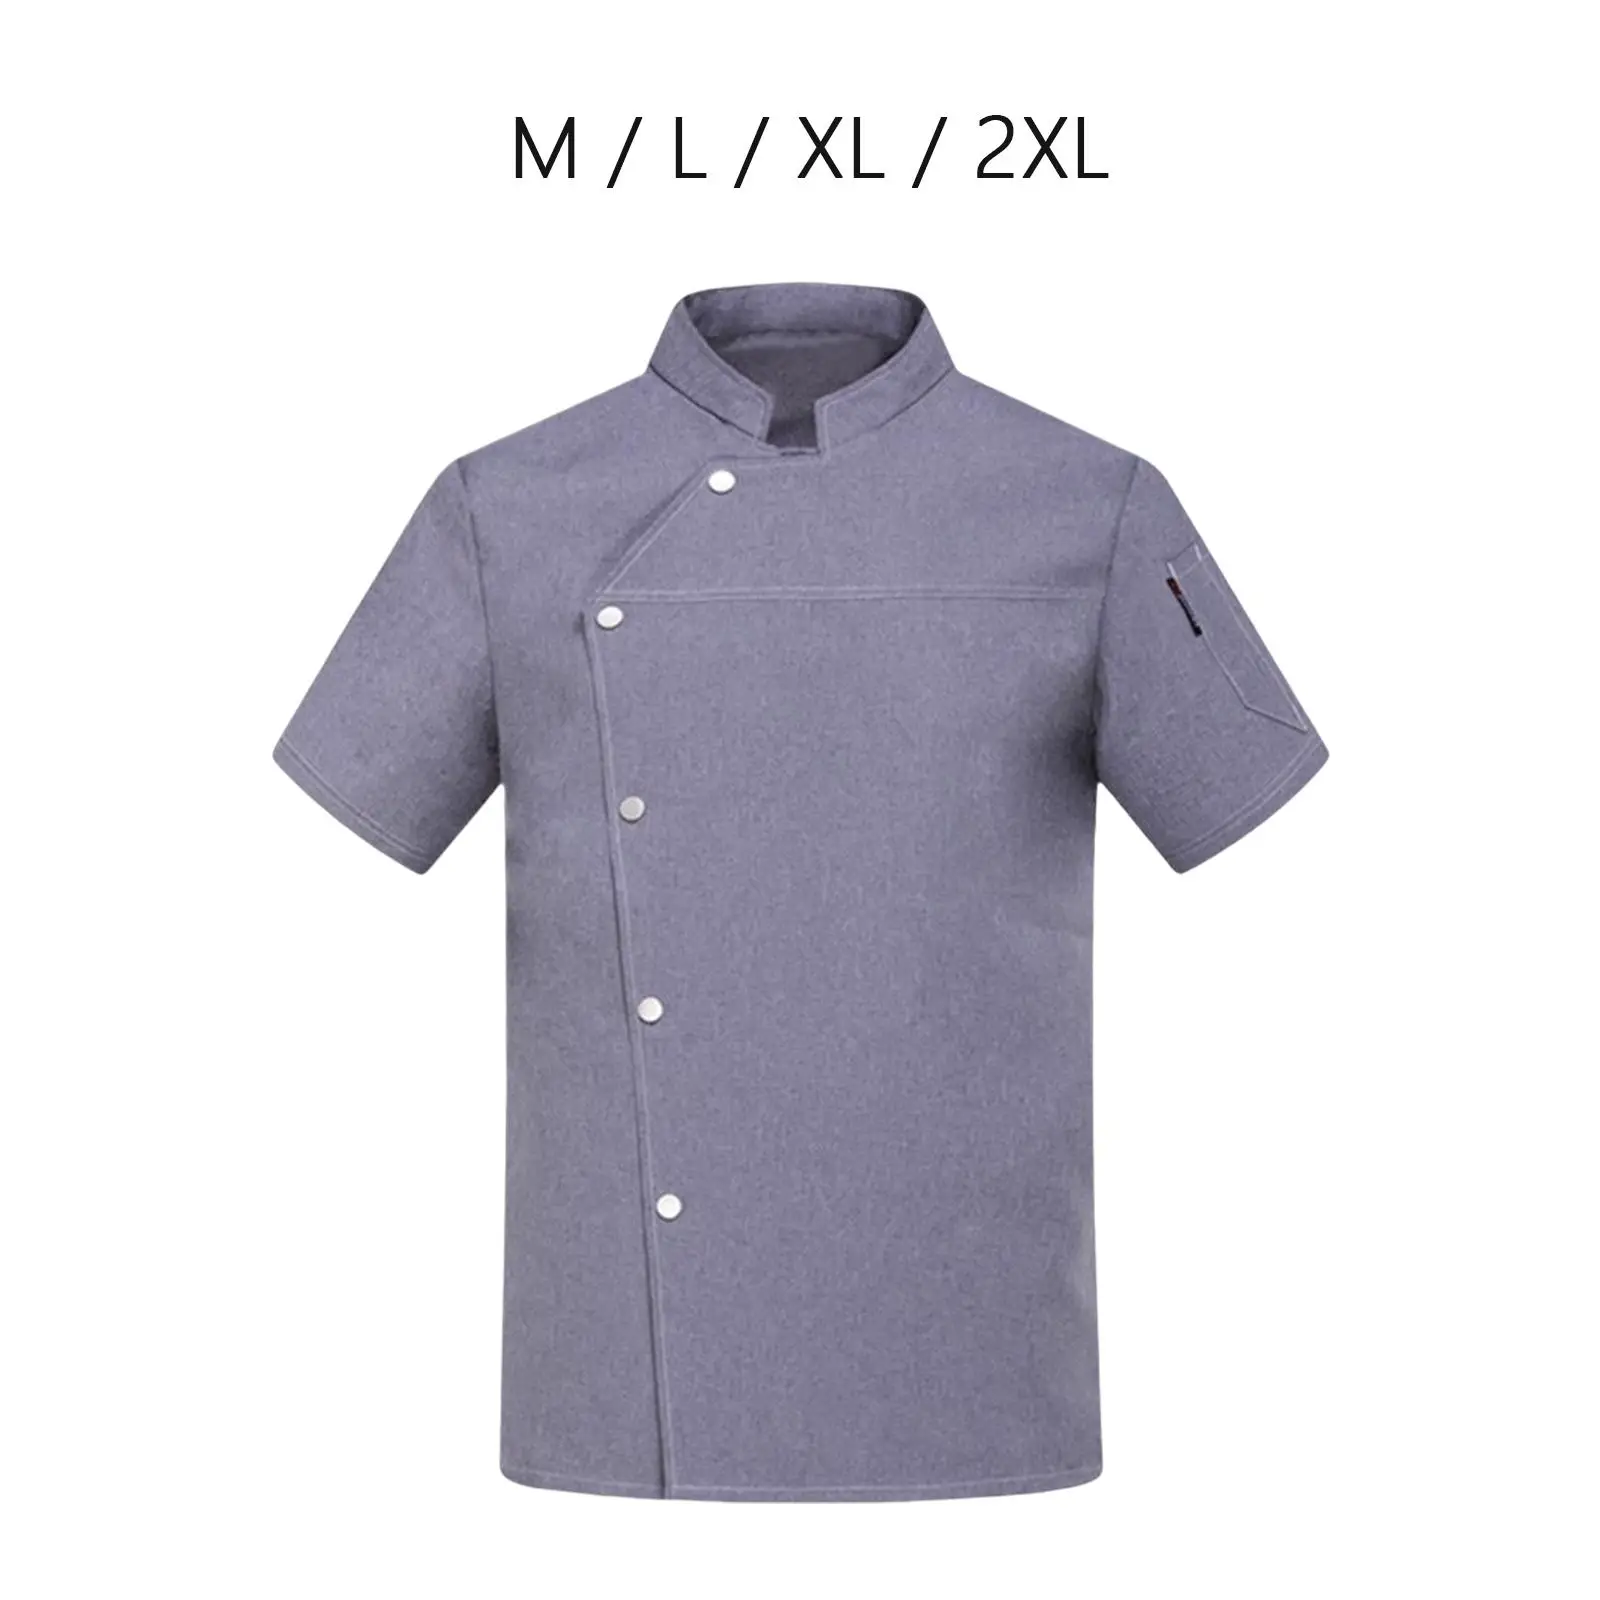 Chef Coat Jacket Short Length Sleeve Lightweight Breathable Waiter Apparel Chef Uniform for Food Industry Bakery Hotel Kitchen